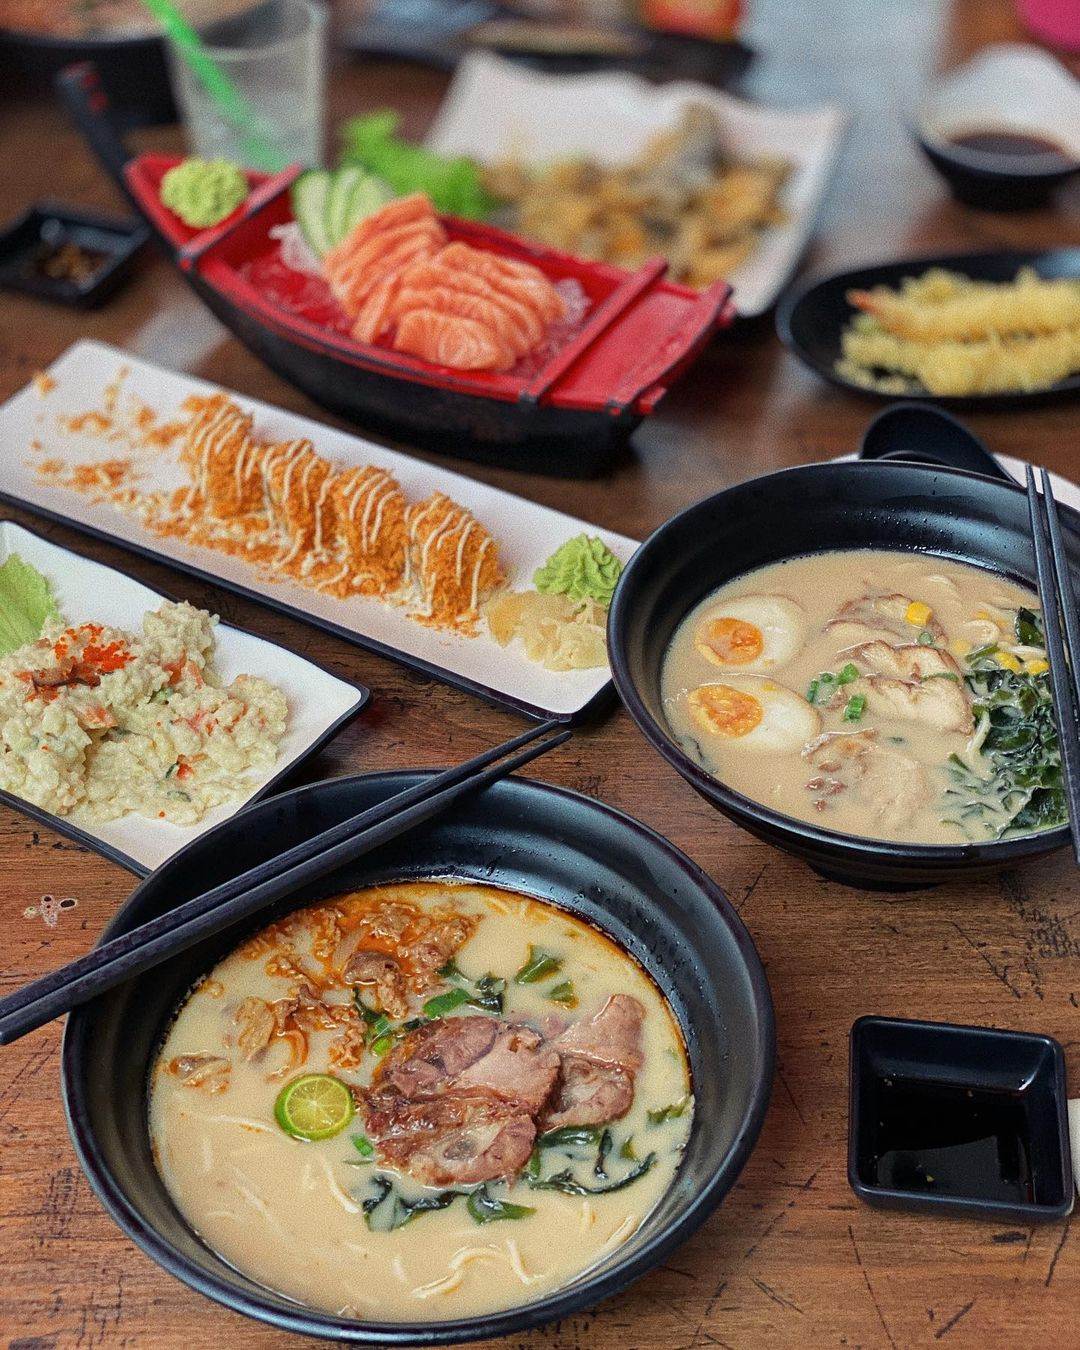 Halal cafes and resto in S'pore - The Ramen Stall